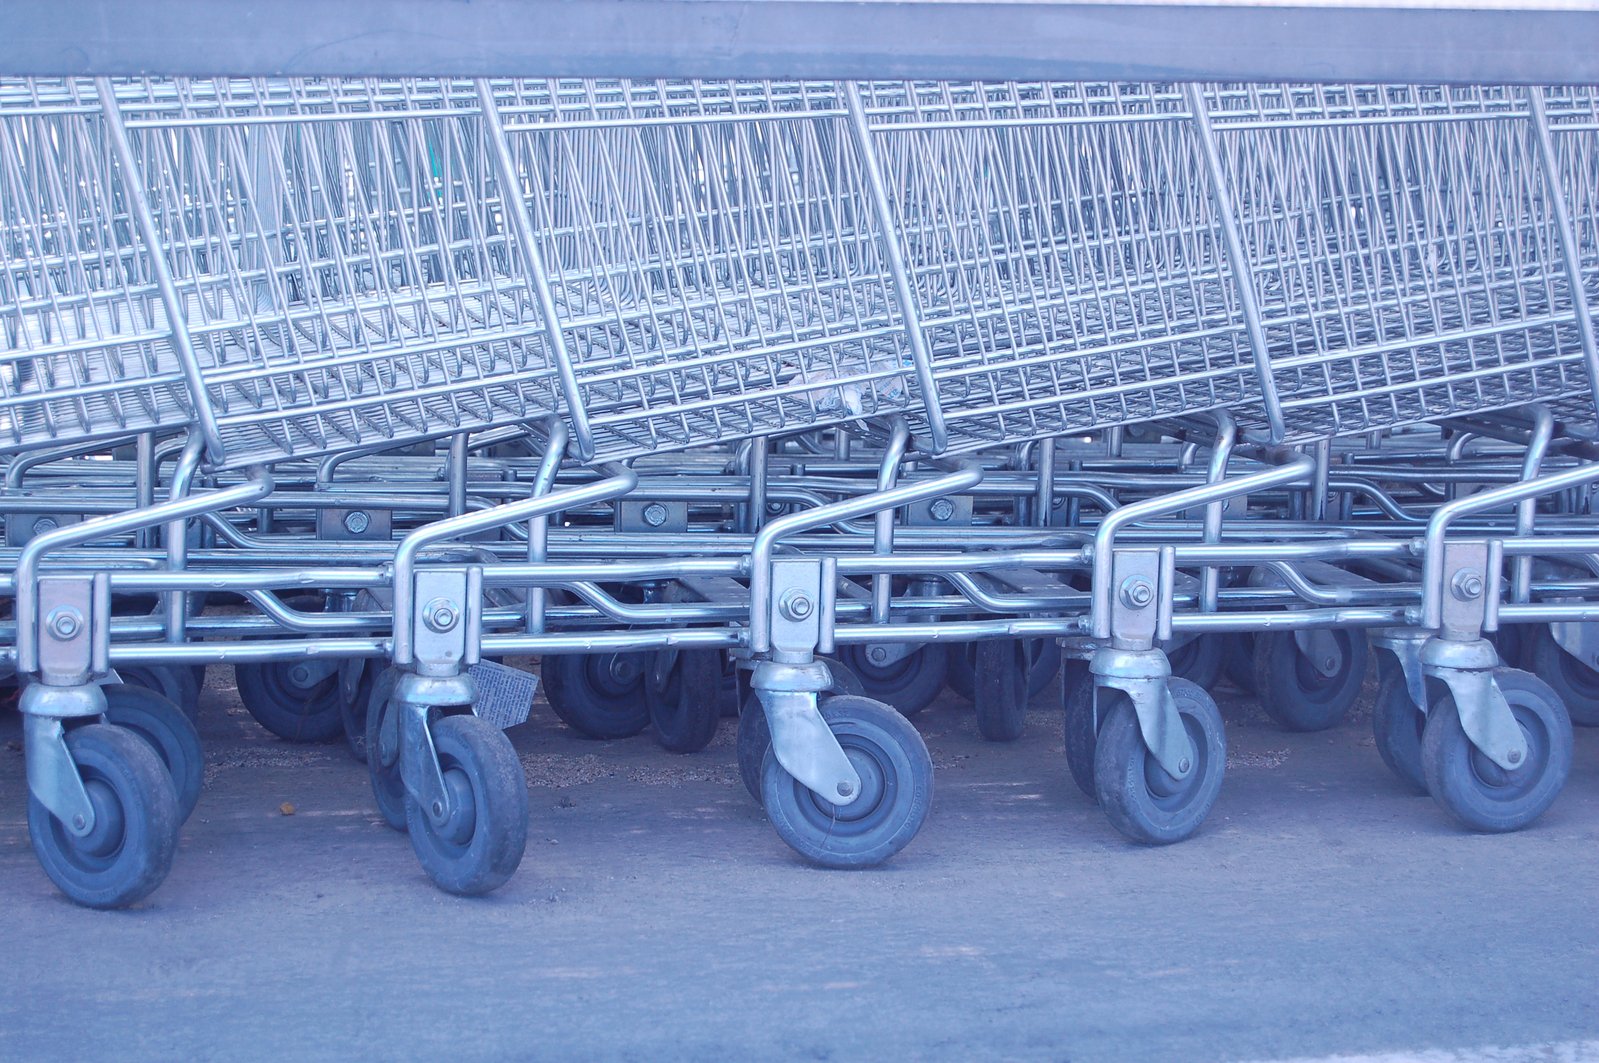 lots of empty shopping carts outside on the pavement